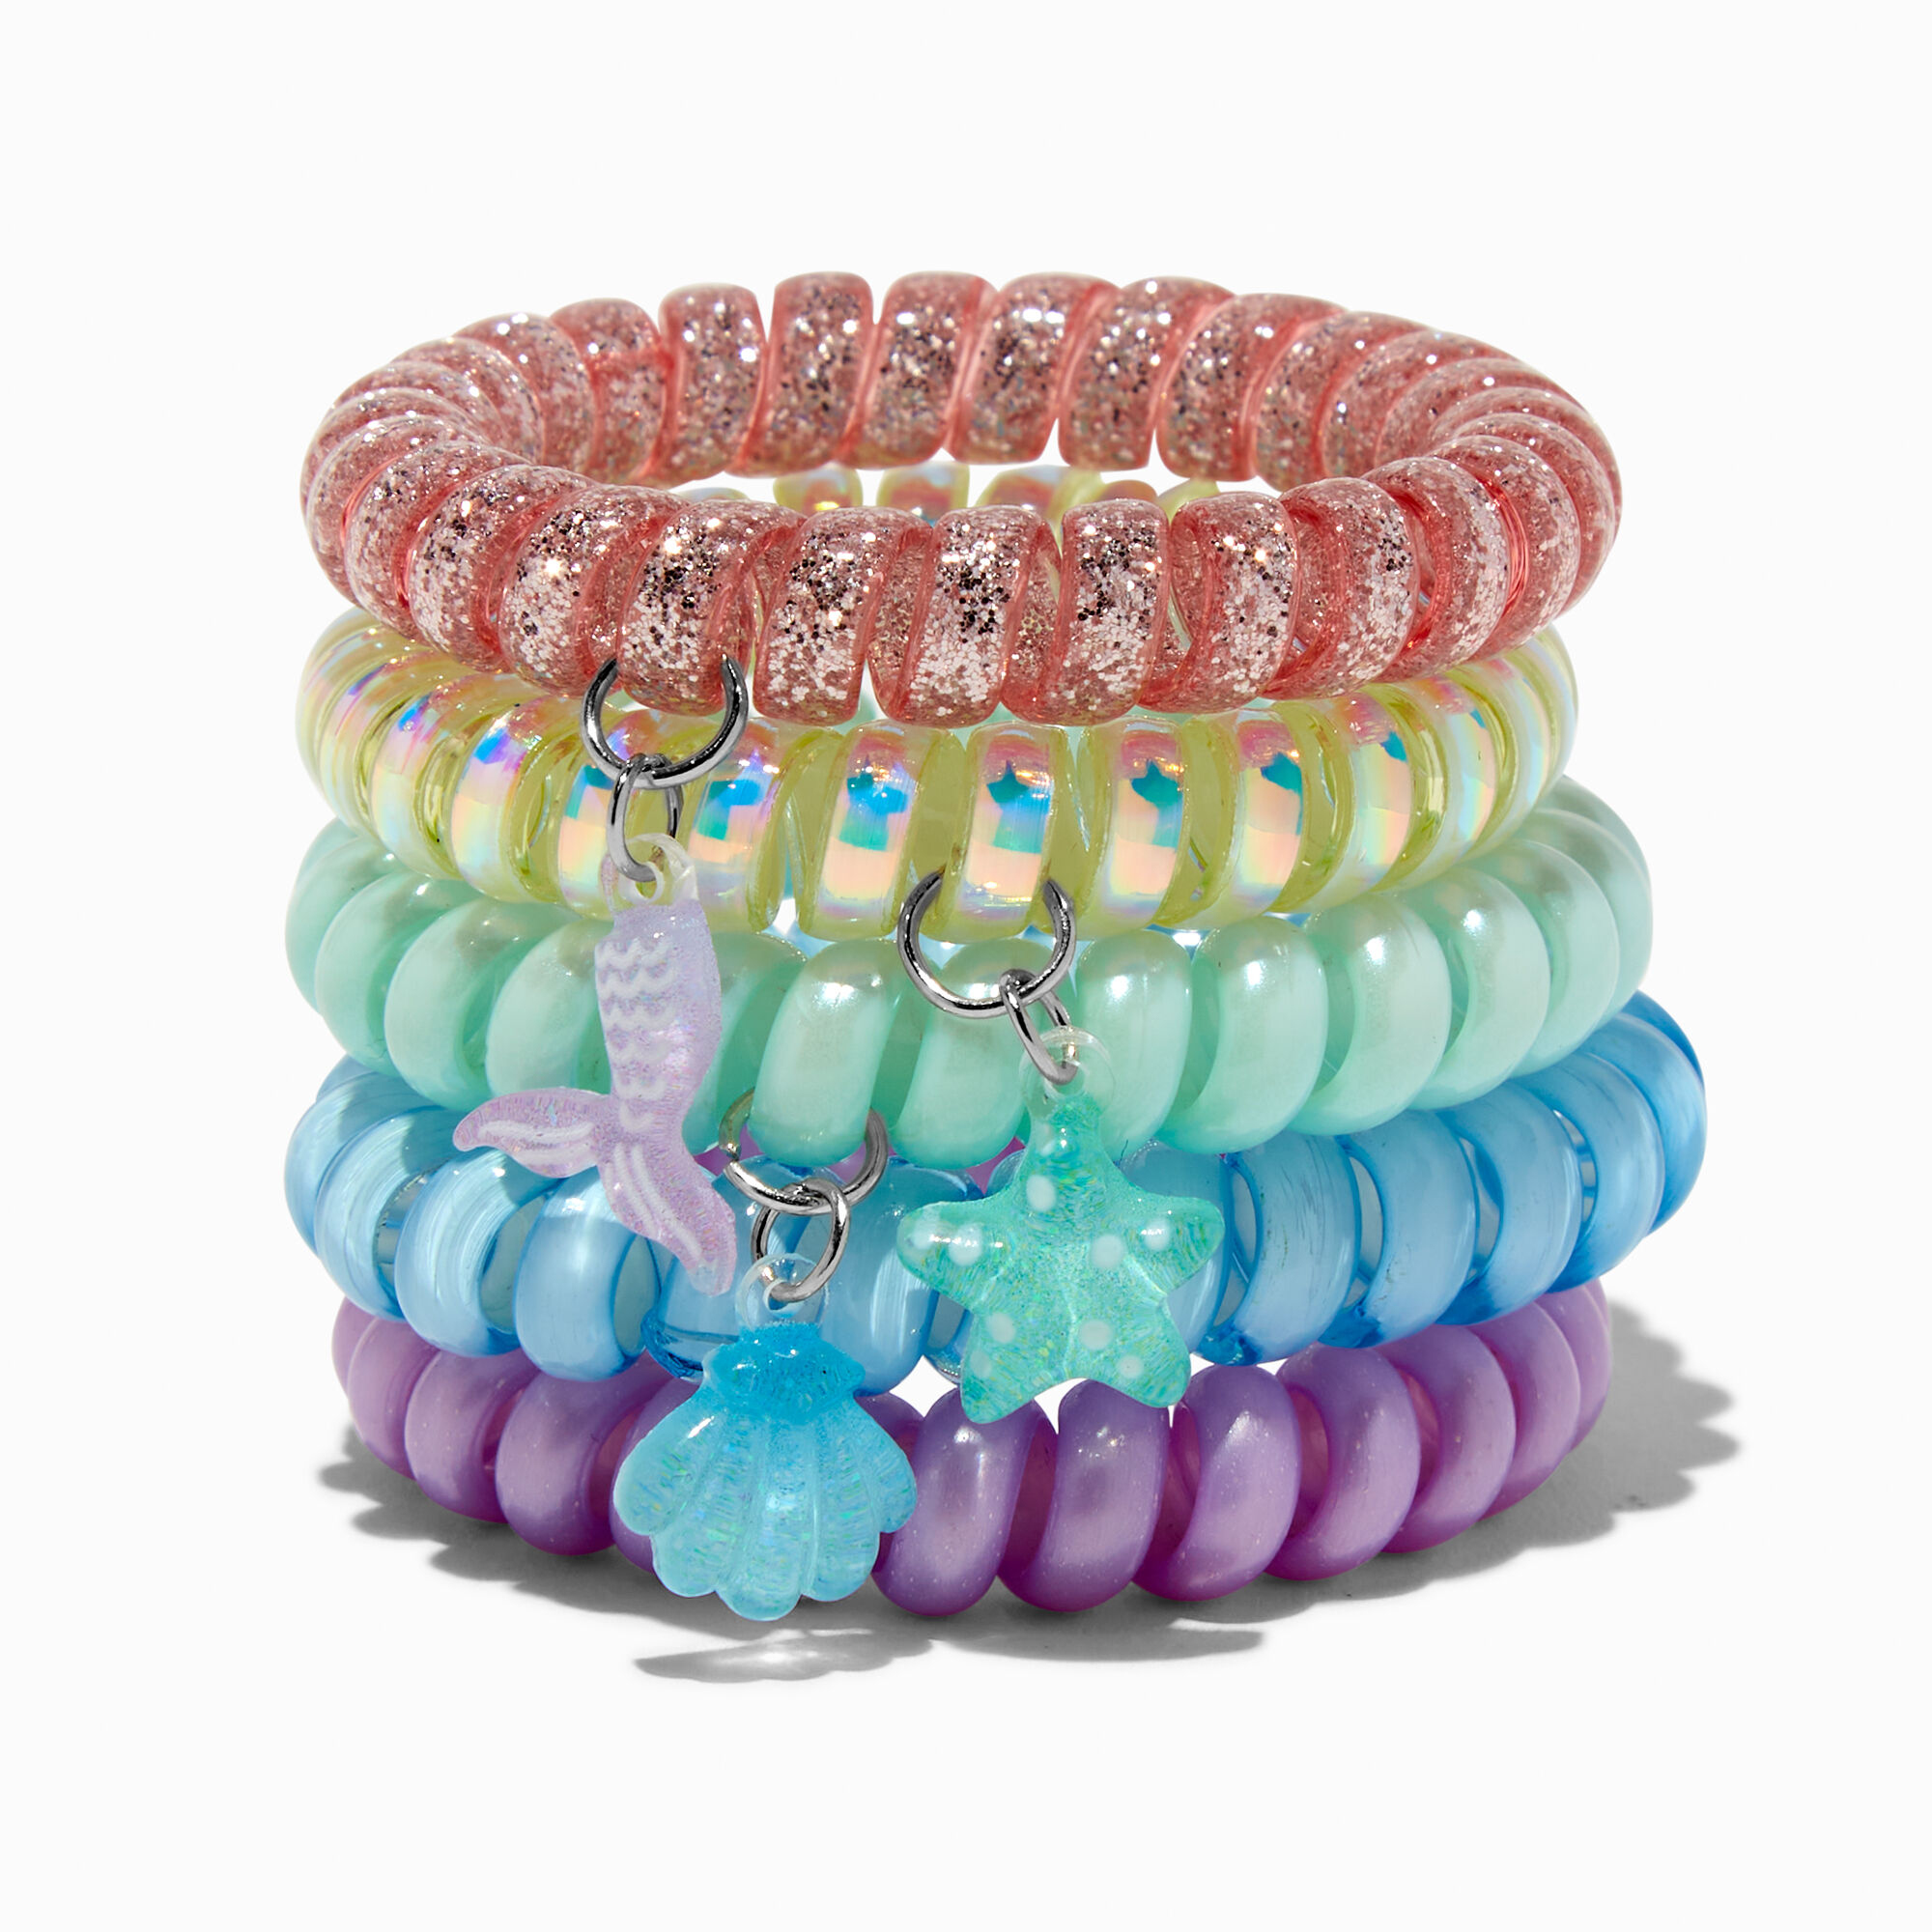 View Claires Club Mermaid Coil Bracelets 5 Pack information